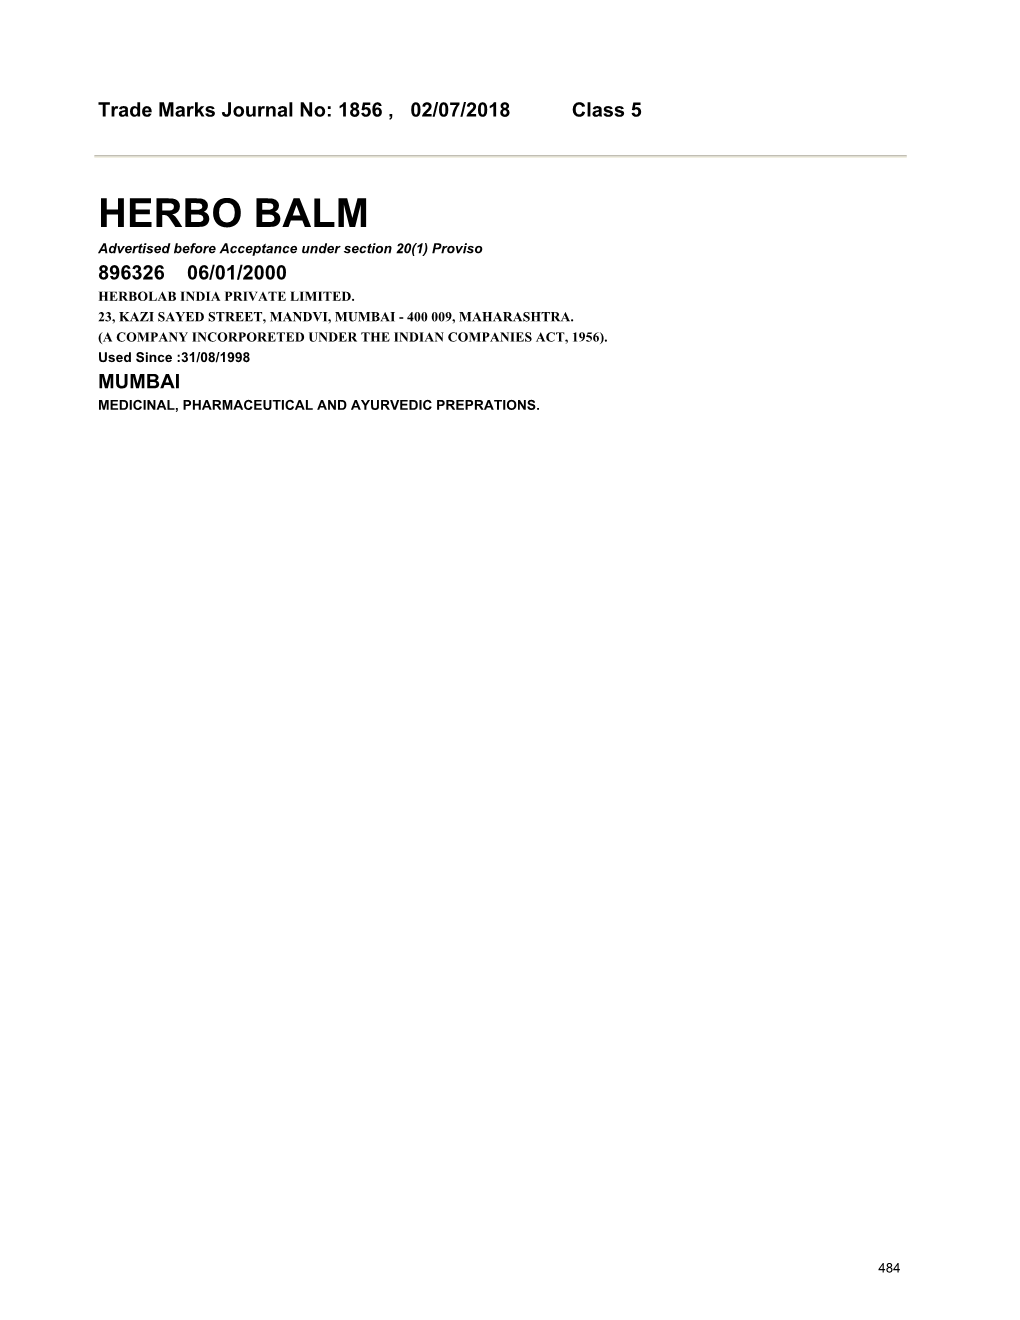 HERBO BALM Advertised Before Acceptance Under Section 20(1) Proviso 896326 06/01/2000 HERBOLAB INDIA PRIVATE LIMITED